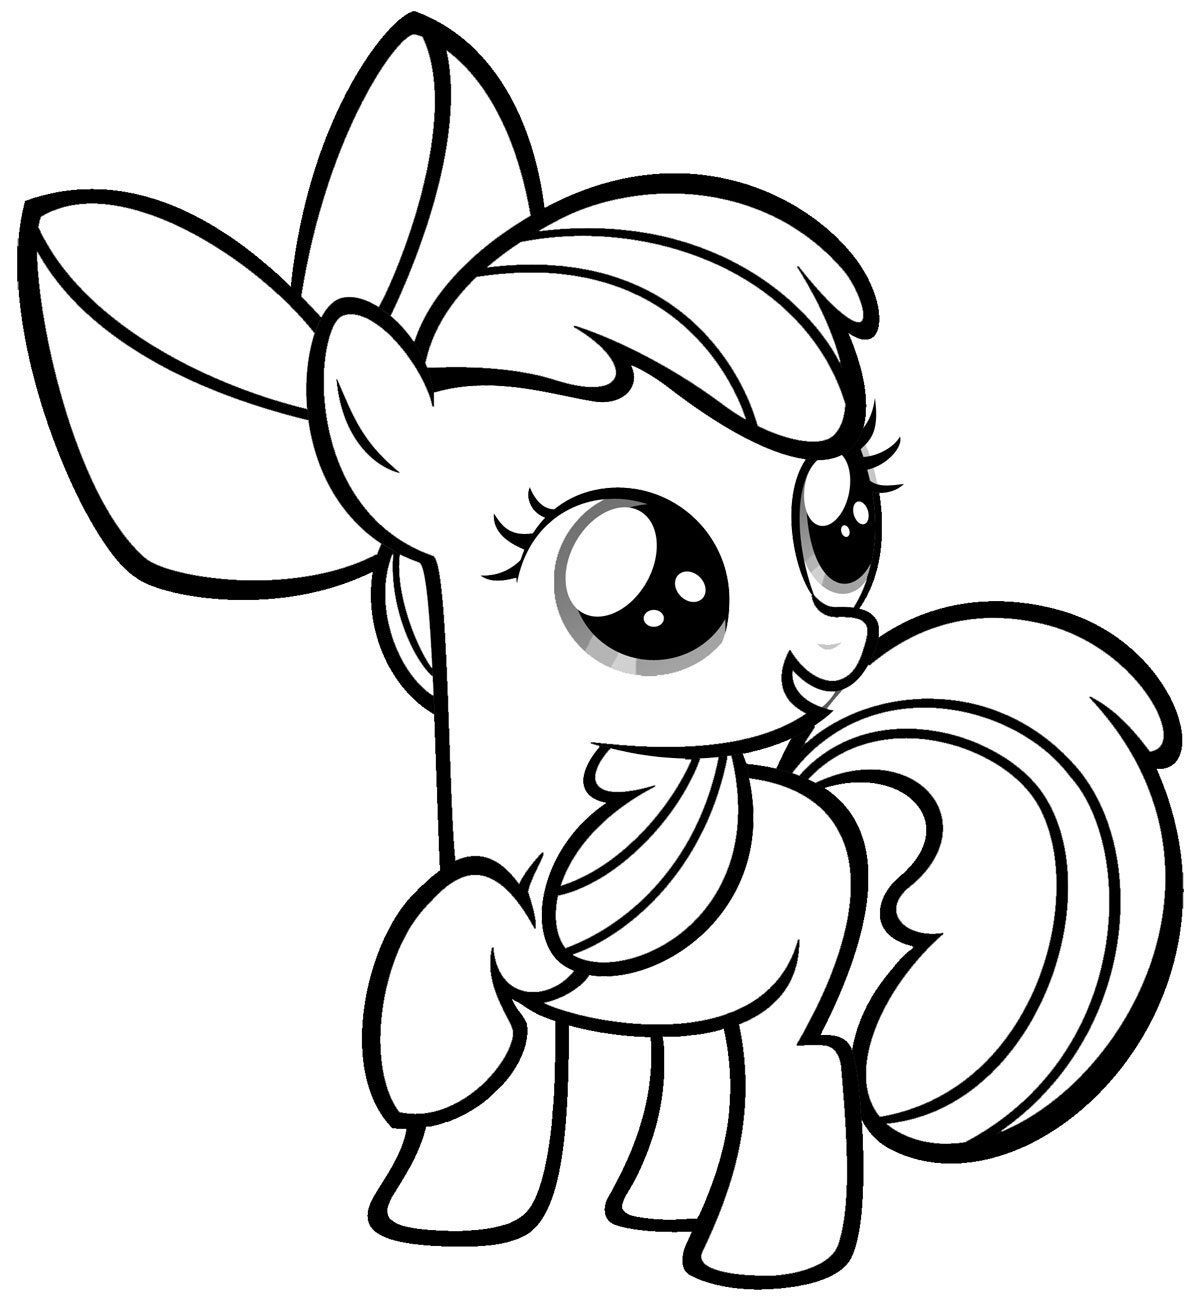 Easy Coloring Pages For Girls
 coloring pages for girls 02 ponies Pinterest